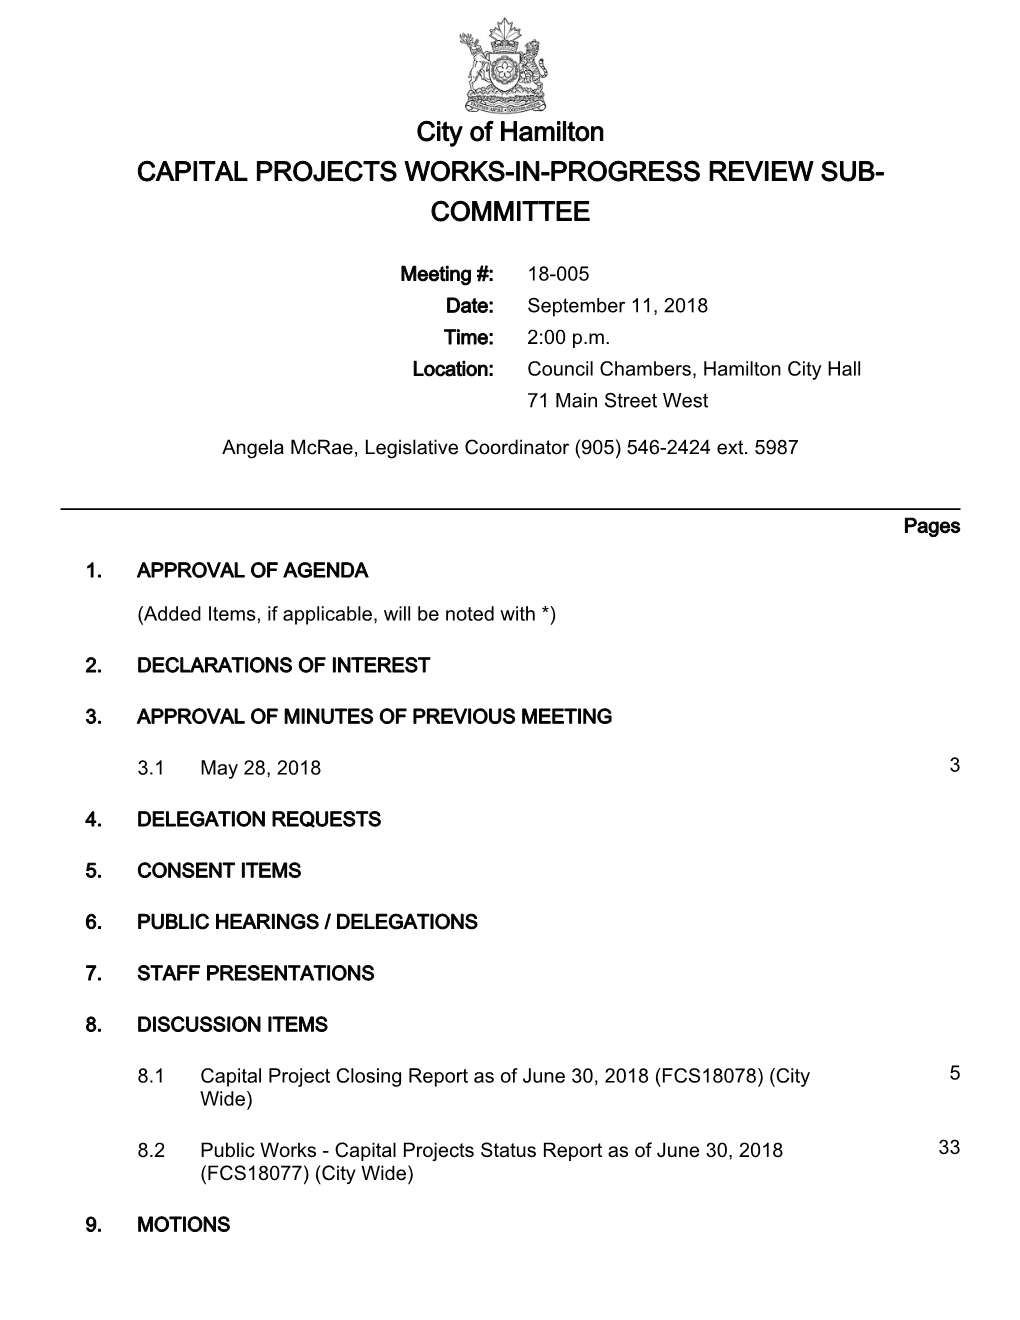 Capital Projects Works-In-Progress Review Sub-Committee Agenda